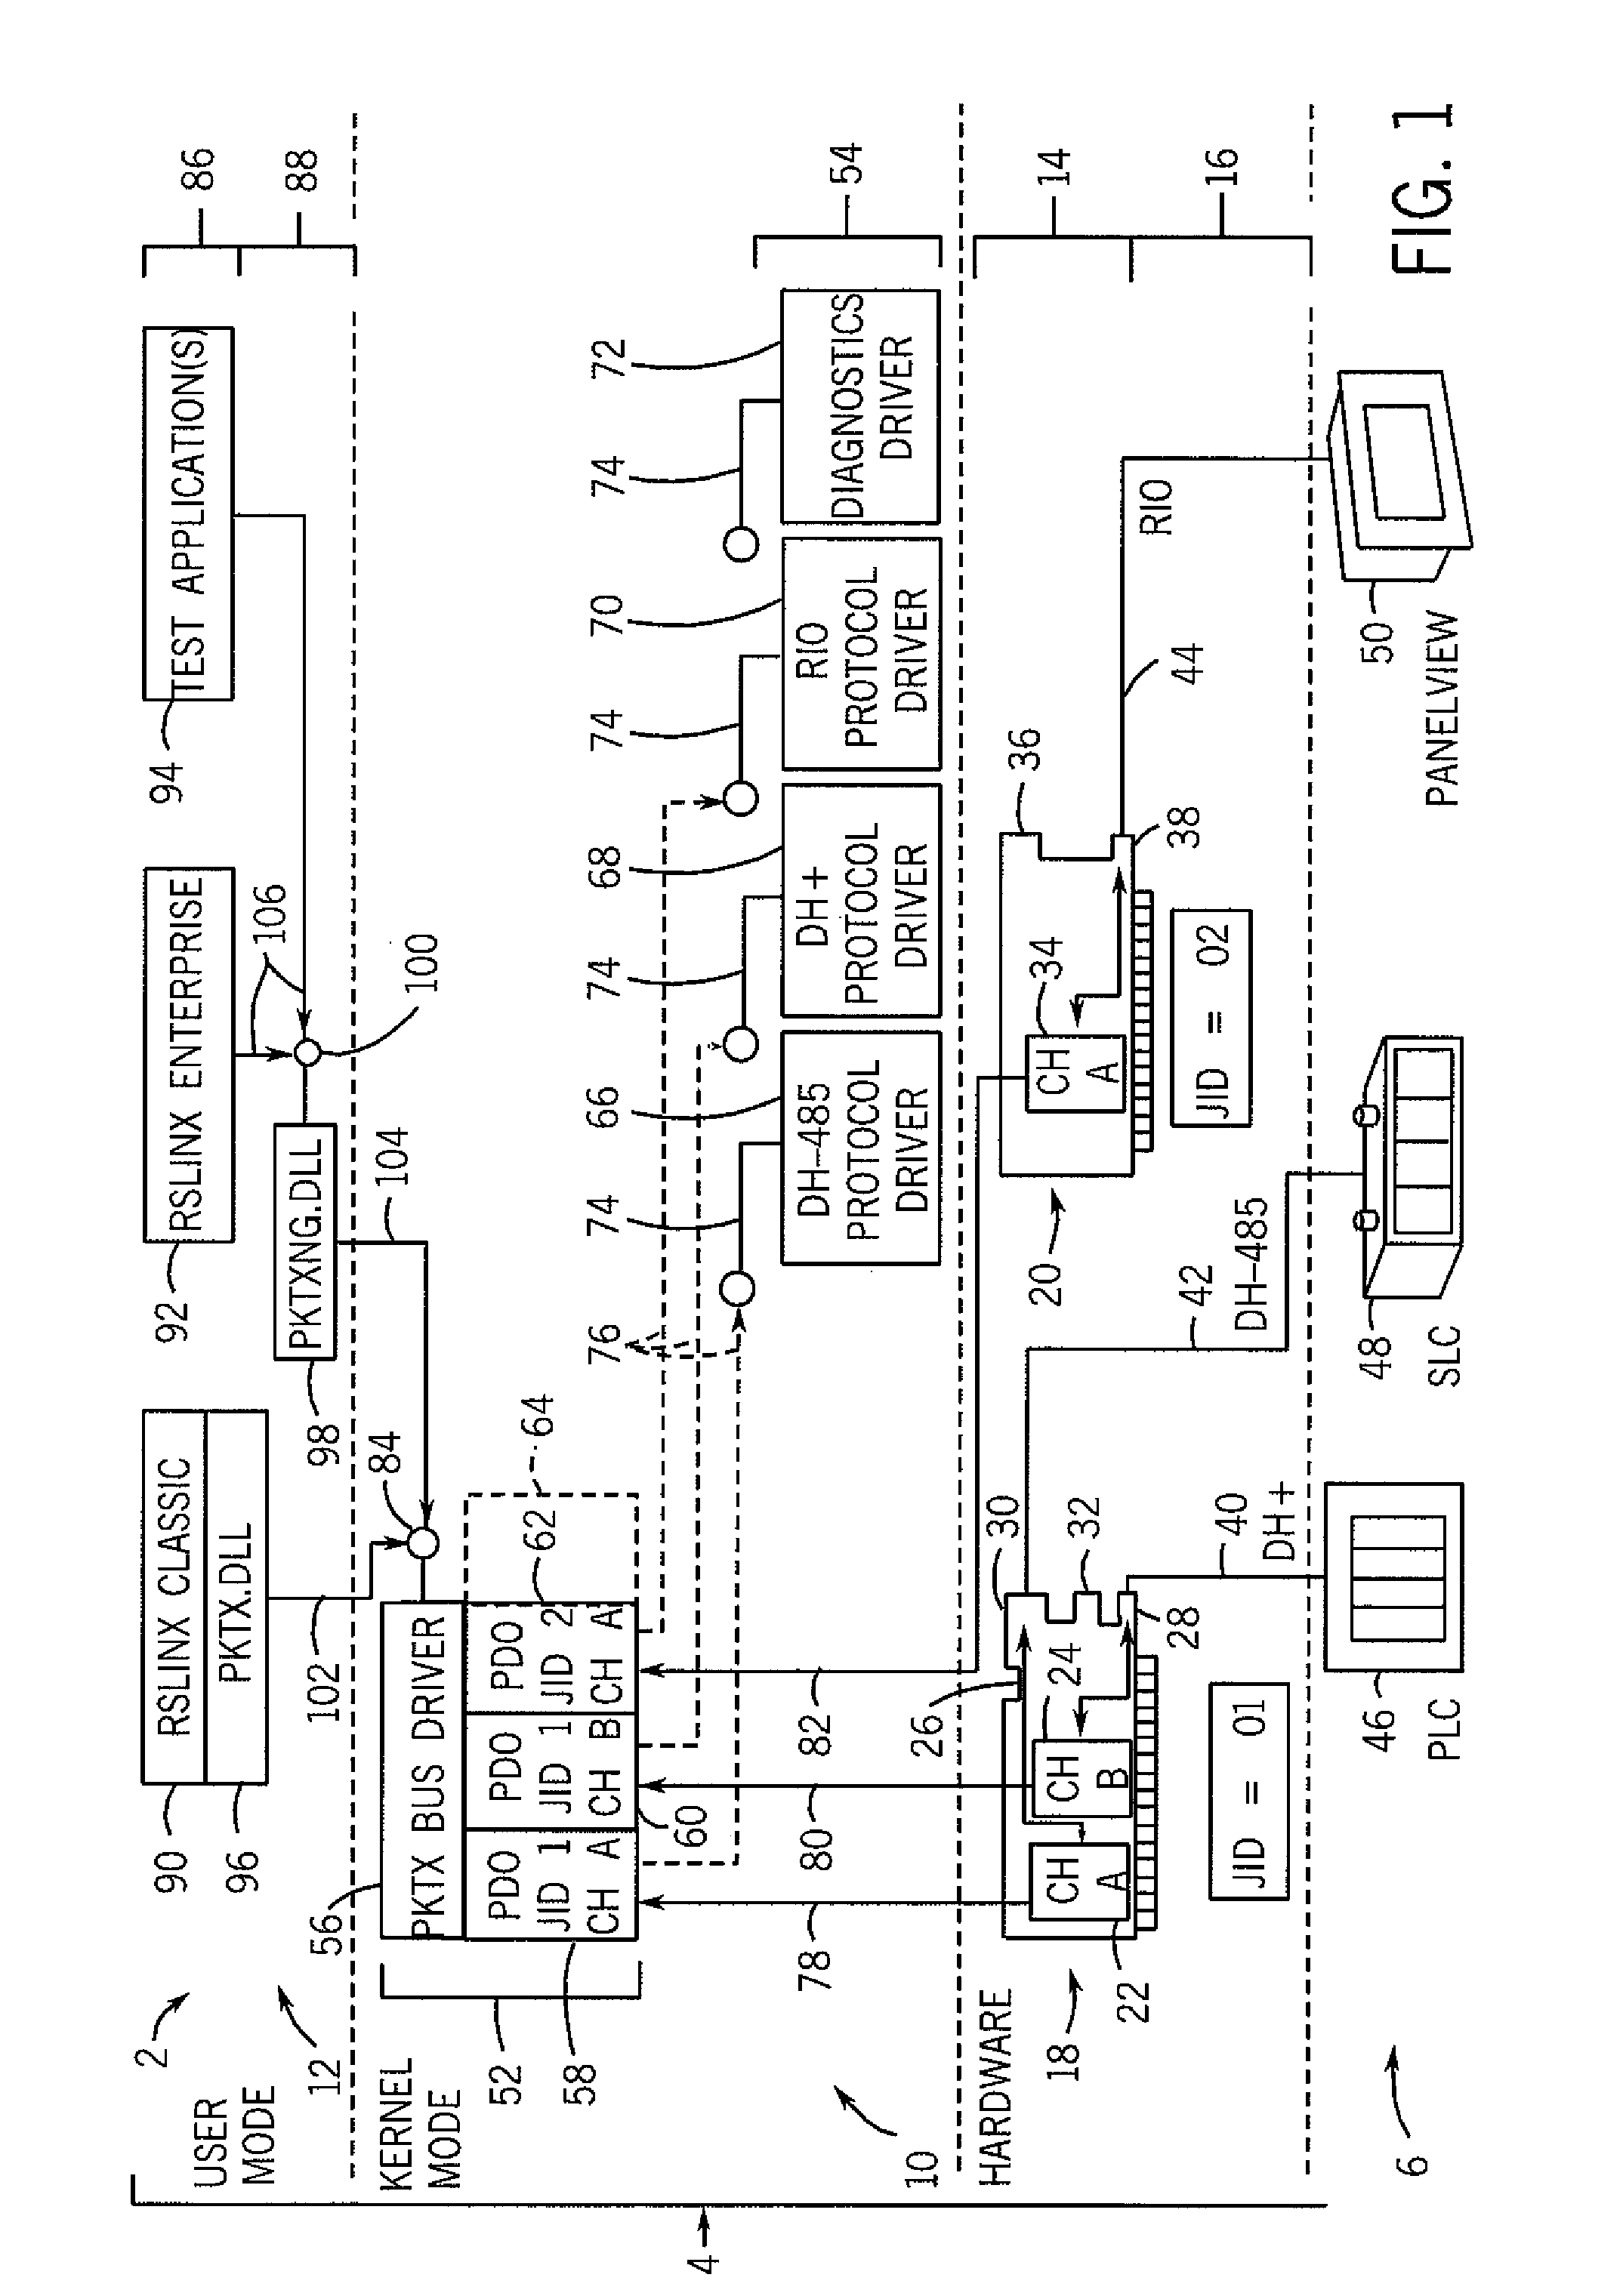 System and method for implementing and/or operating network interface devices to achieve network-based communications